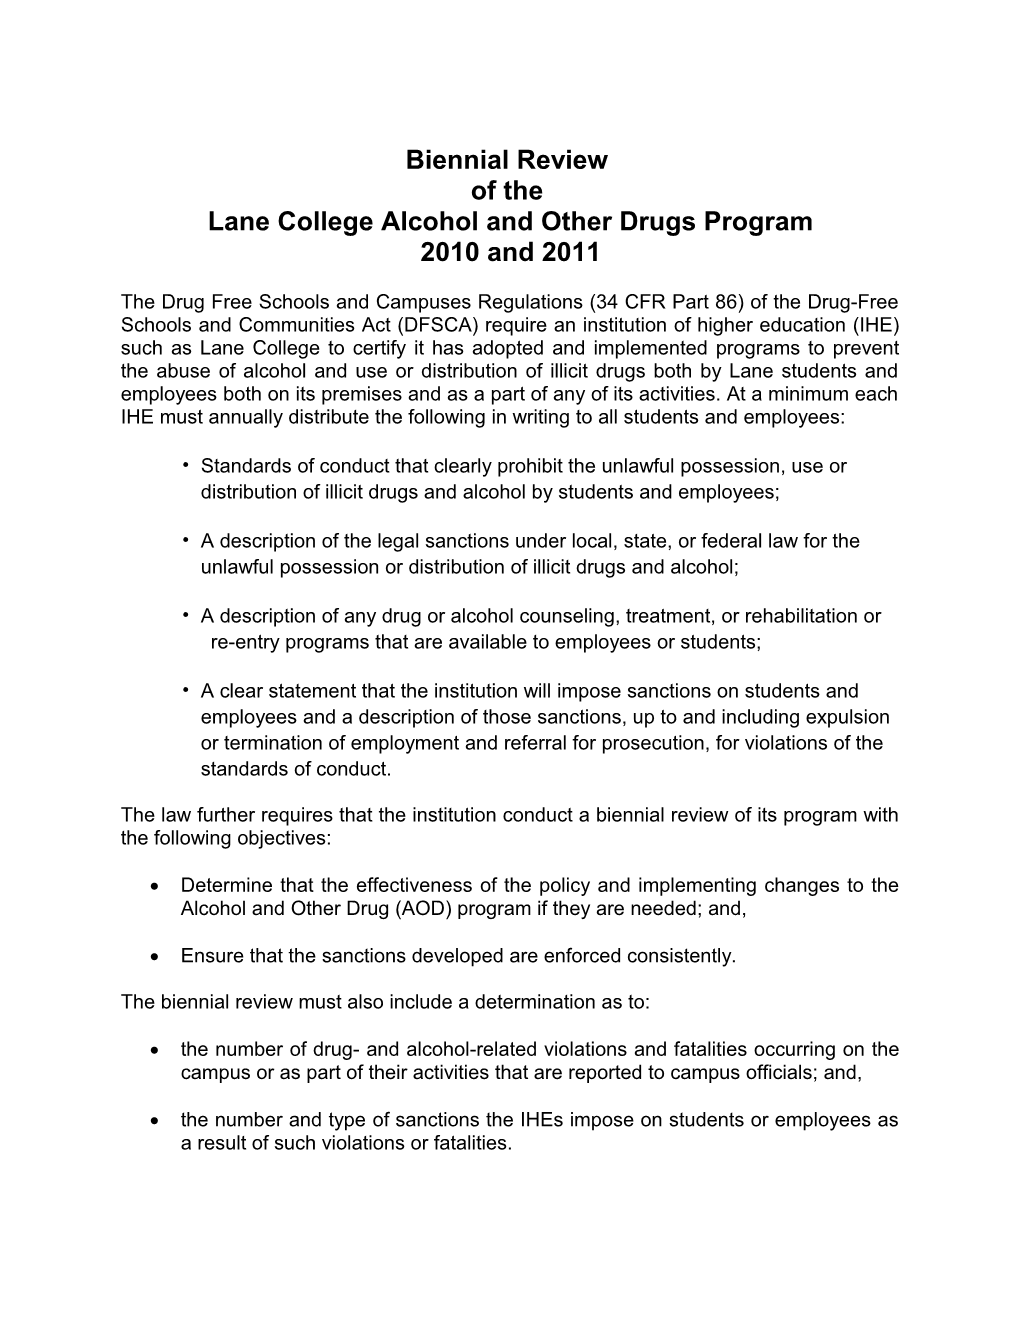 Lane College Alcohol and Other Drugs Program